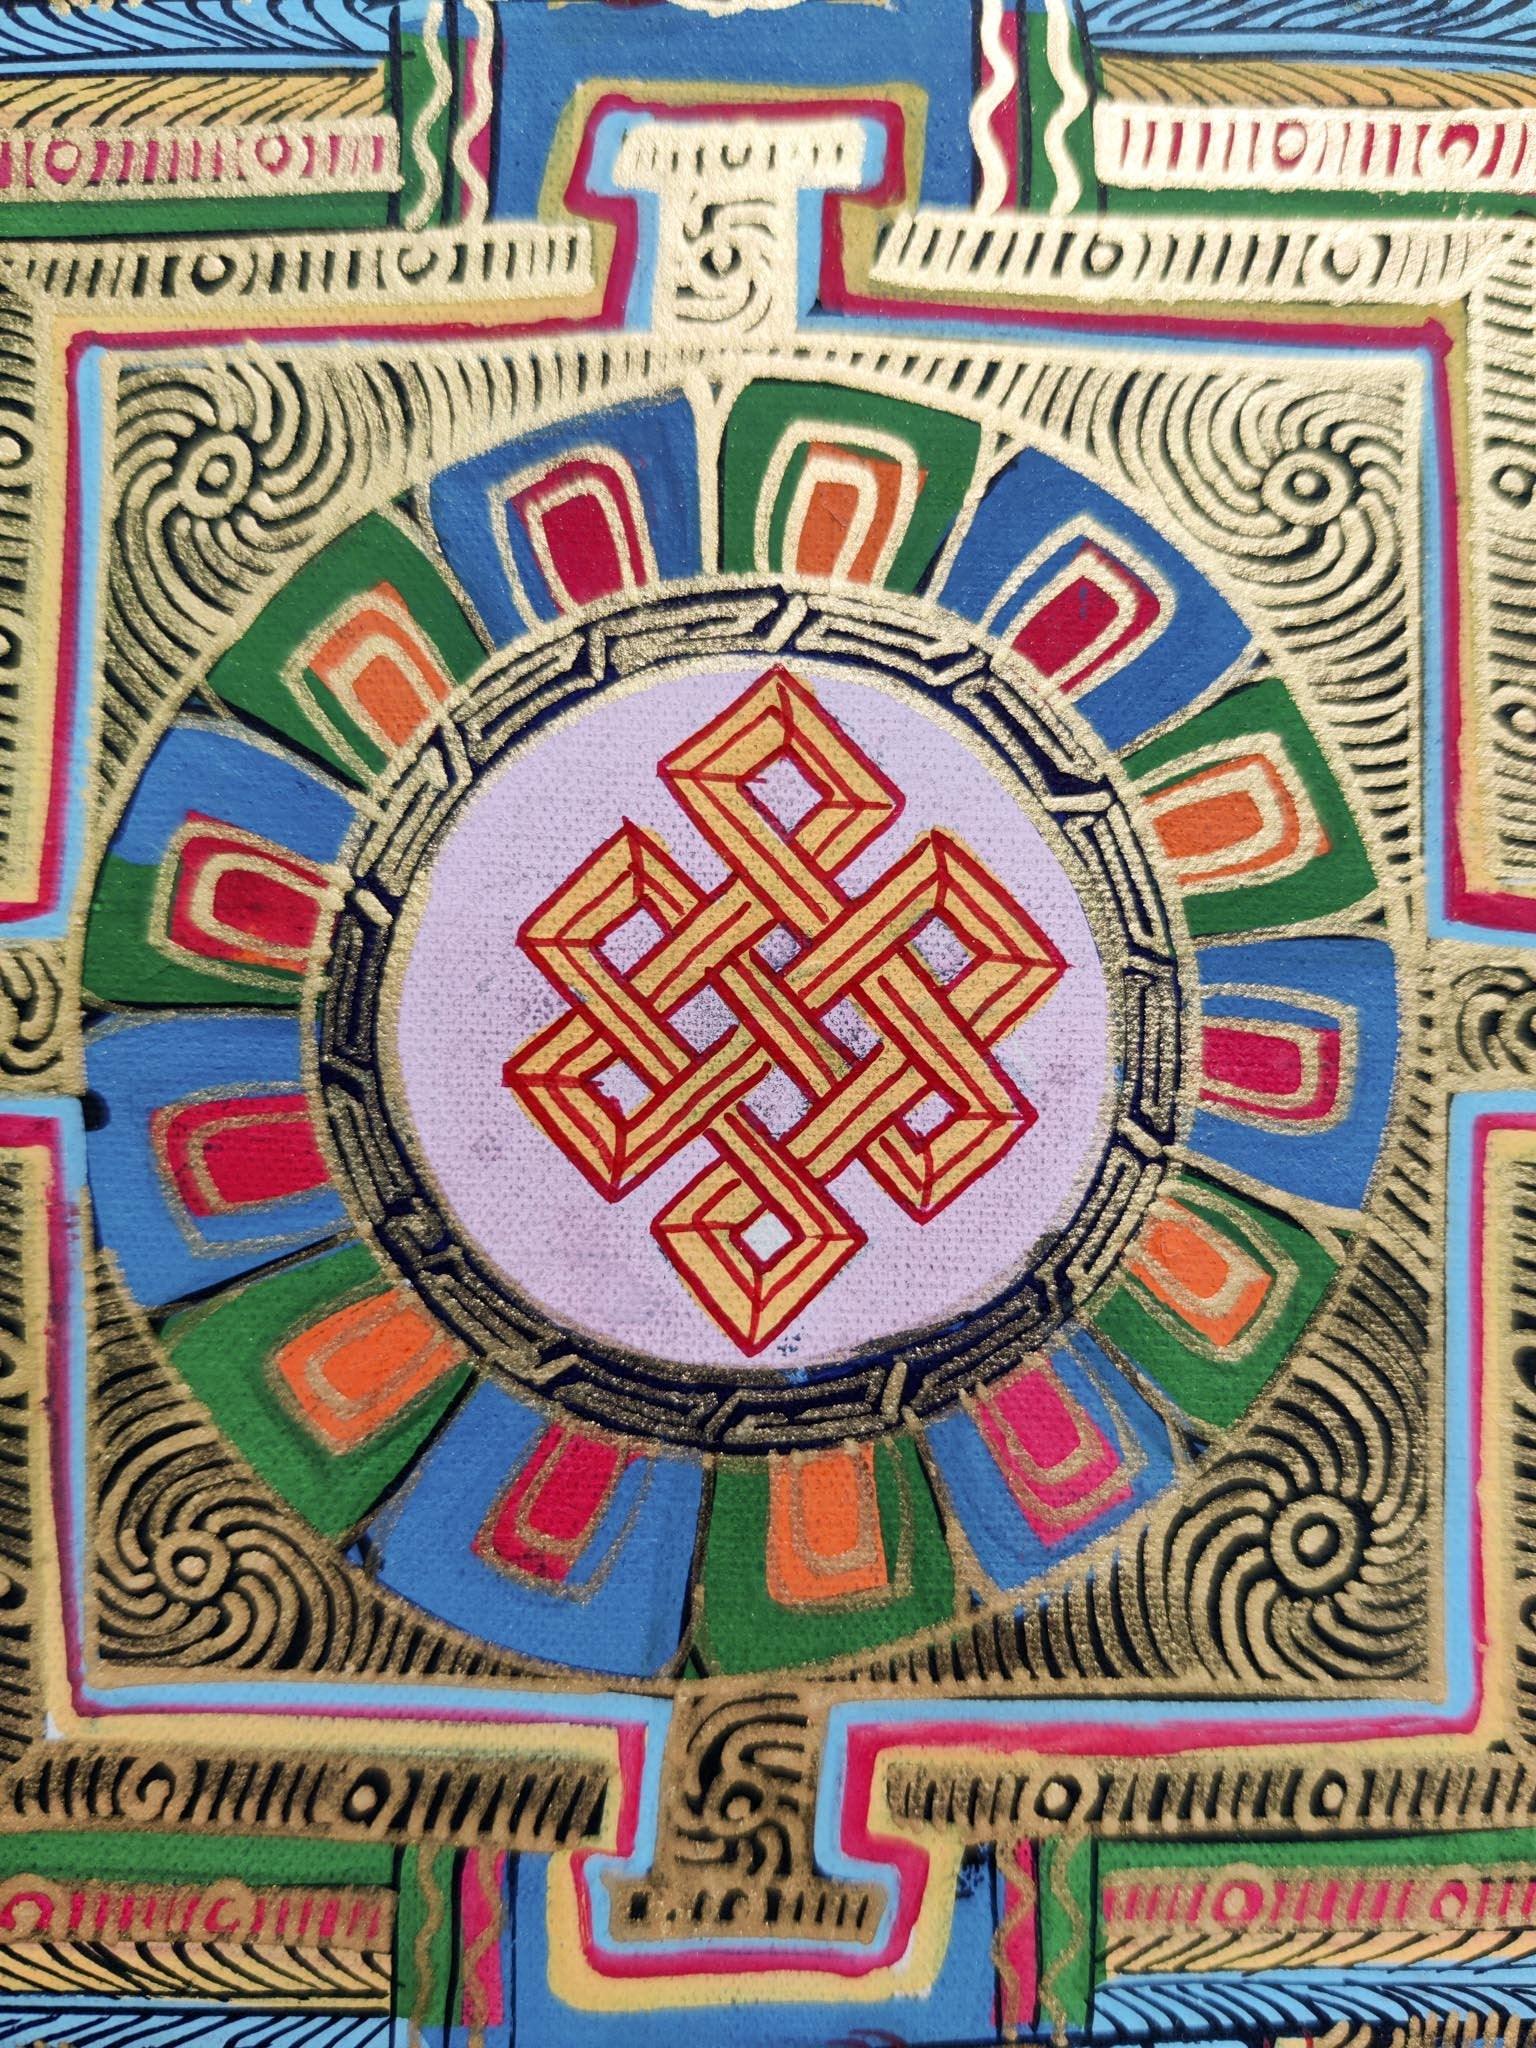 Authentic Hand Painted Mandala for Spirituality